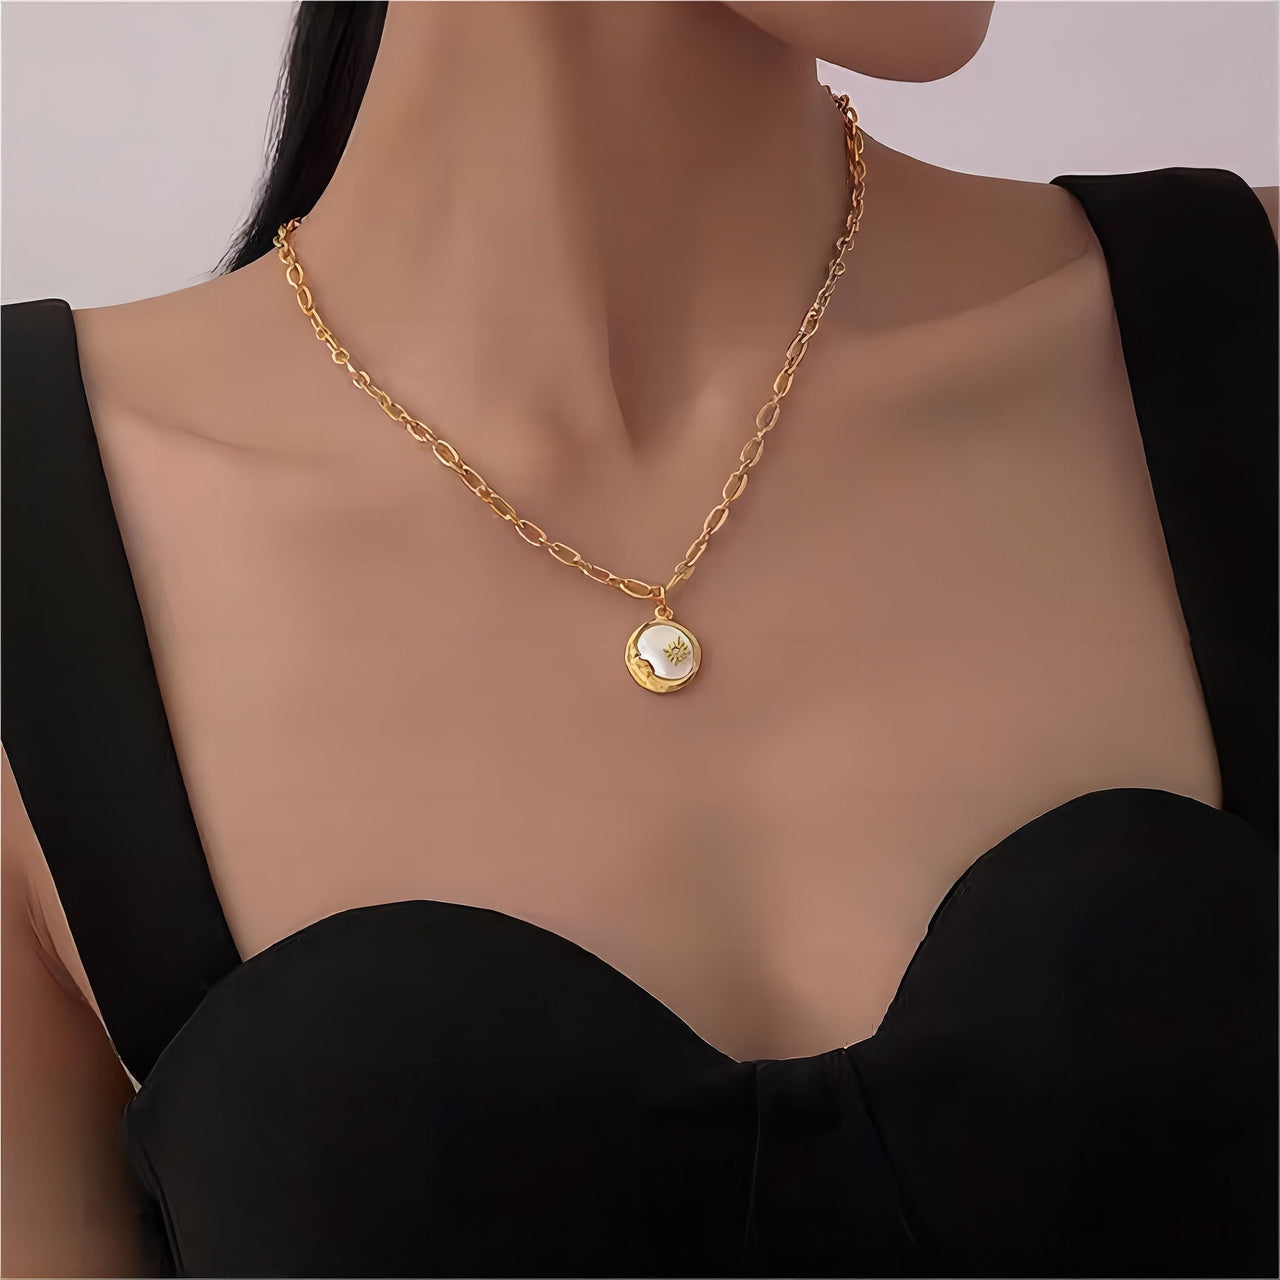 24K Gold Plated Sol And Lune Celestial Necklace - ArtGalleryZen